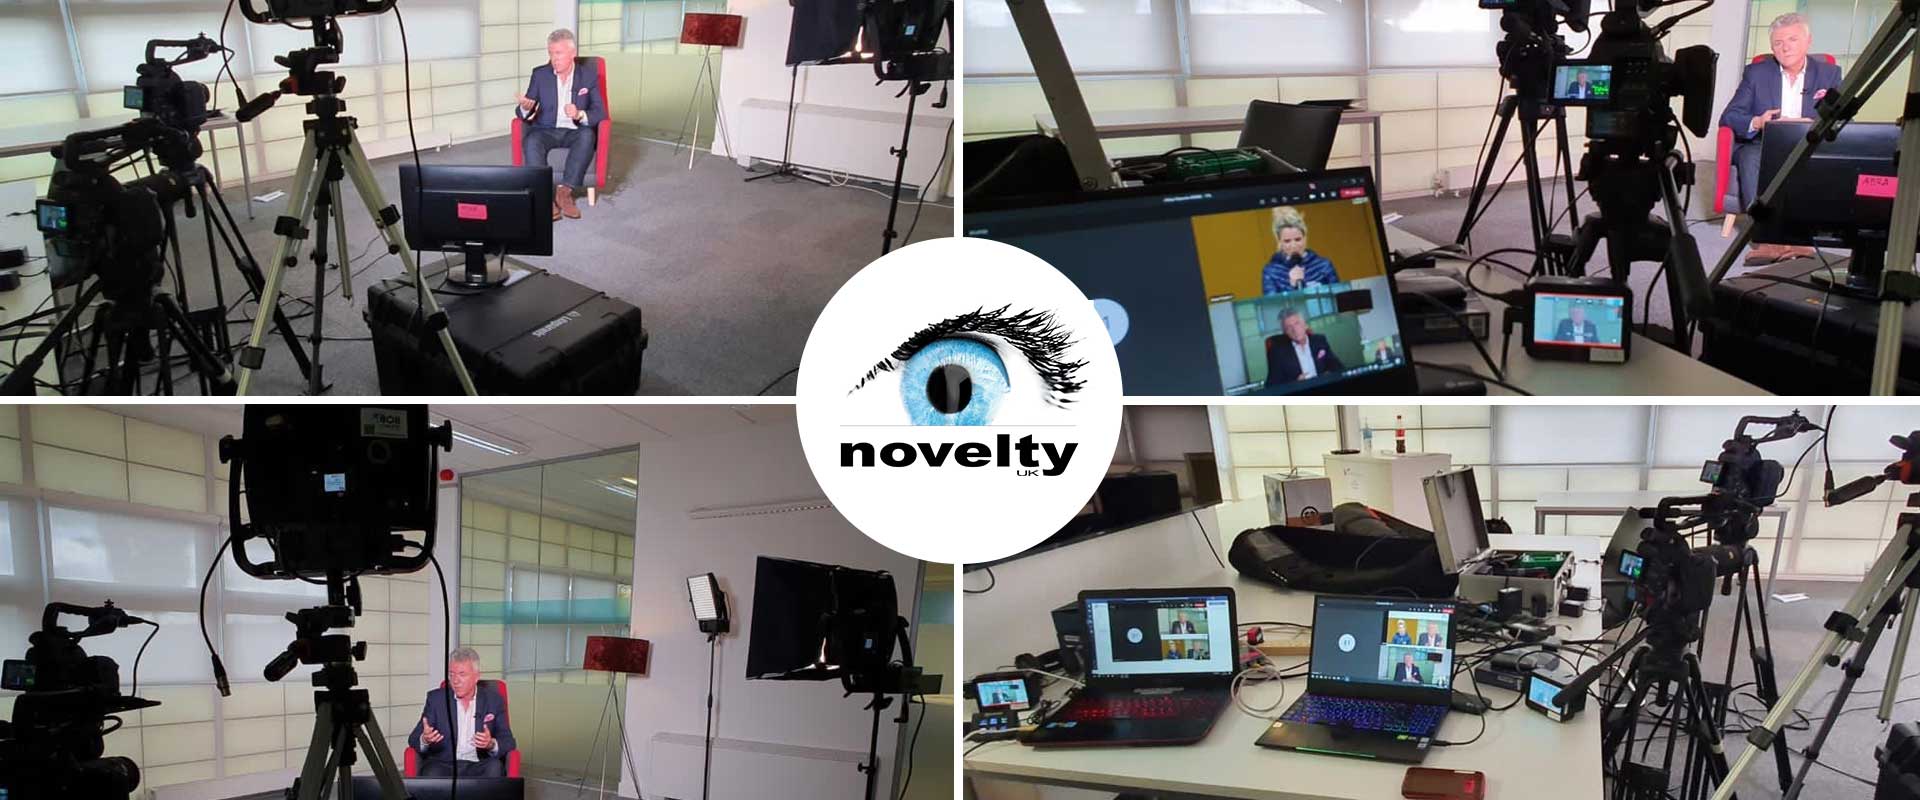 Visuel Novelty UK's team filming and streaming for the digital event “Renault eWays”